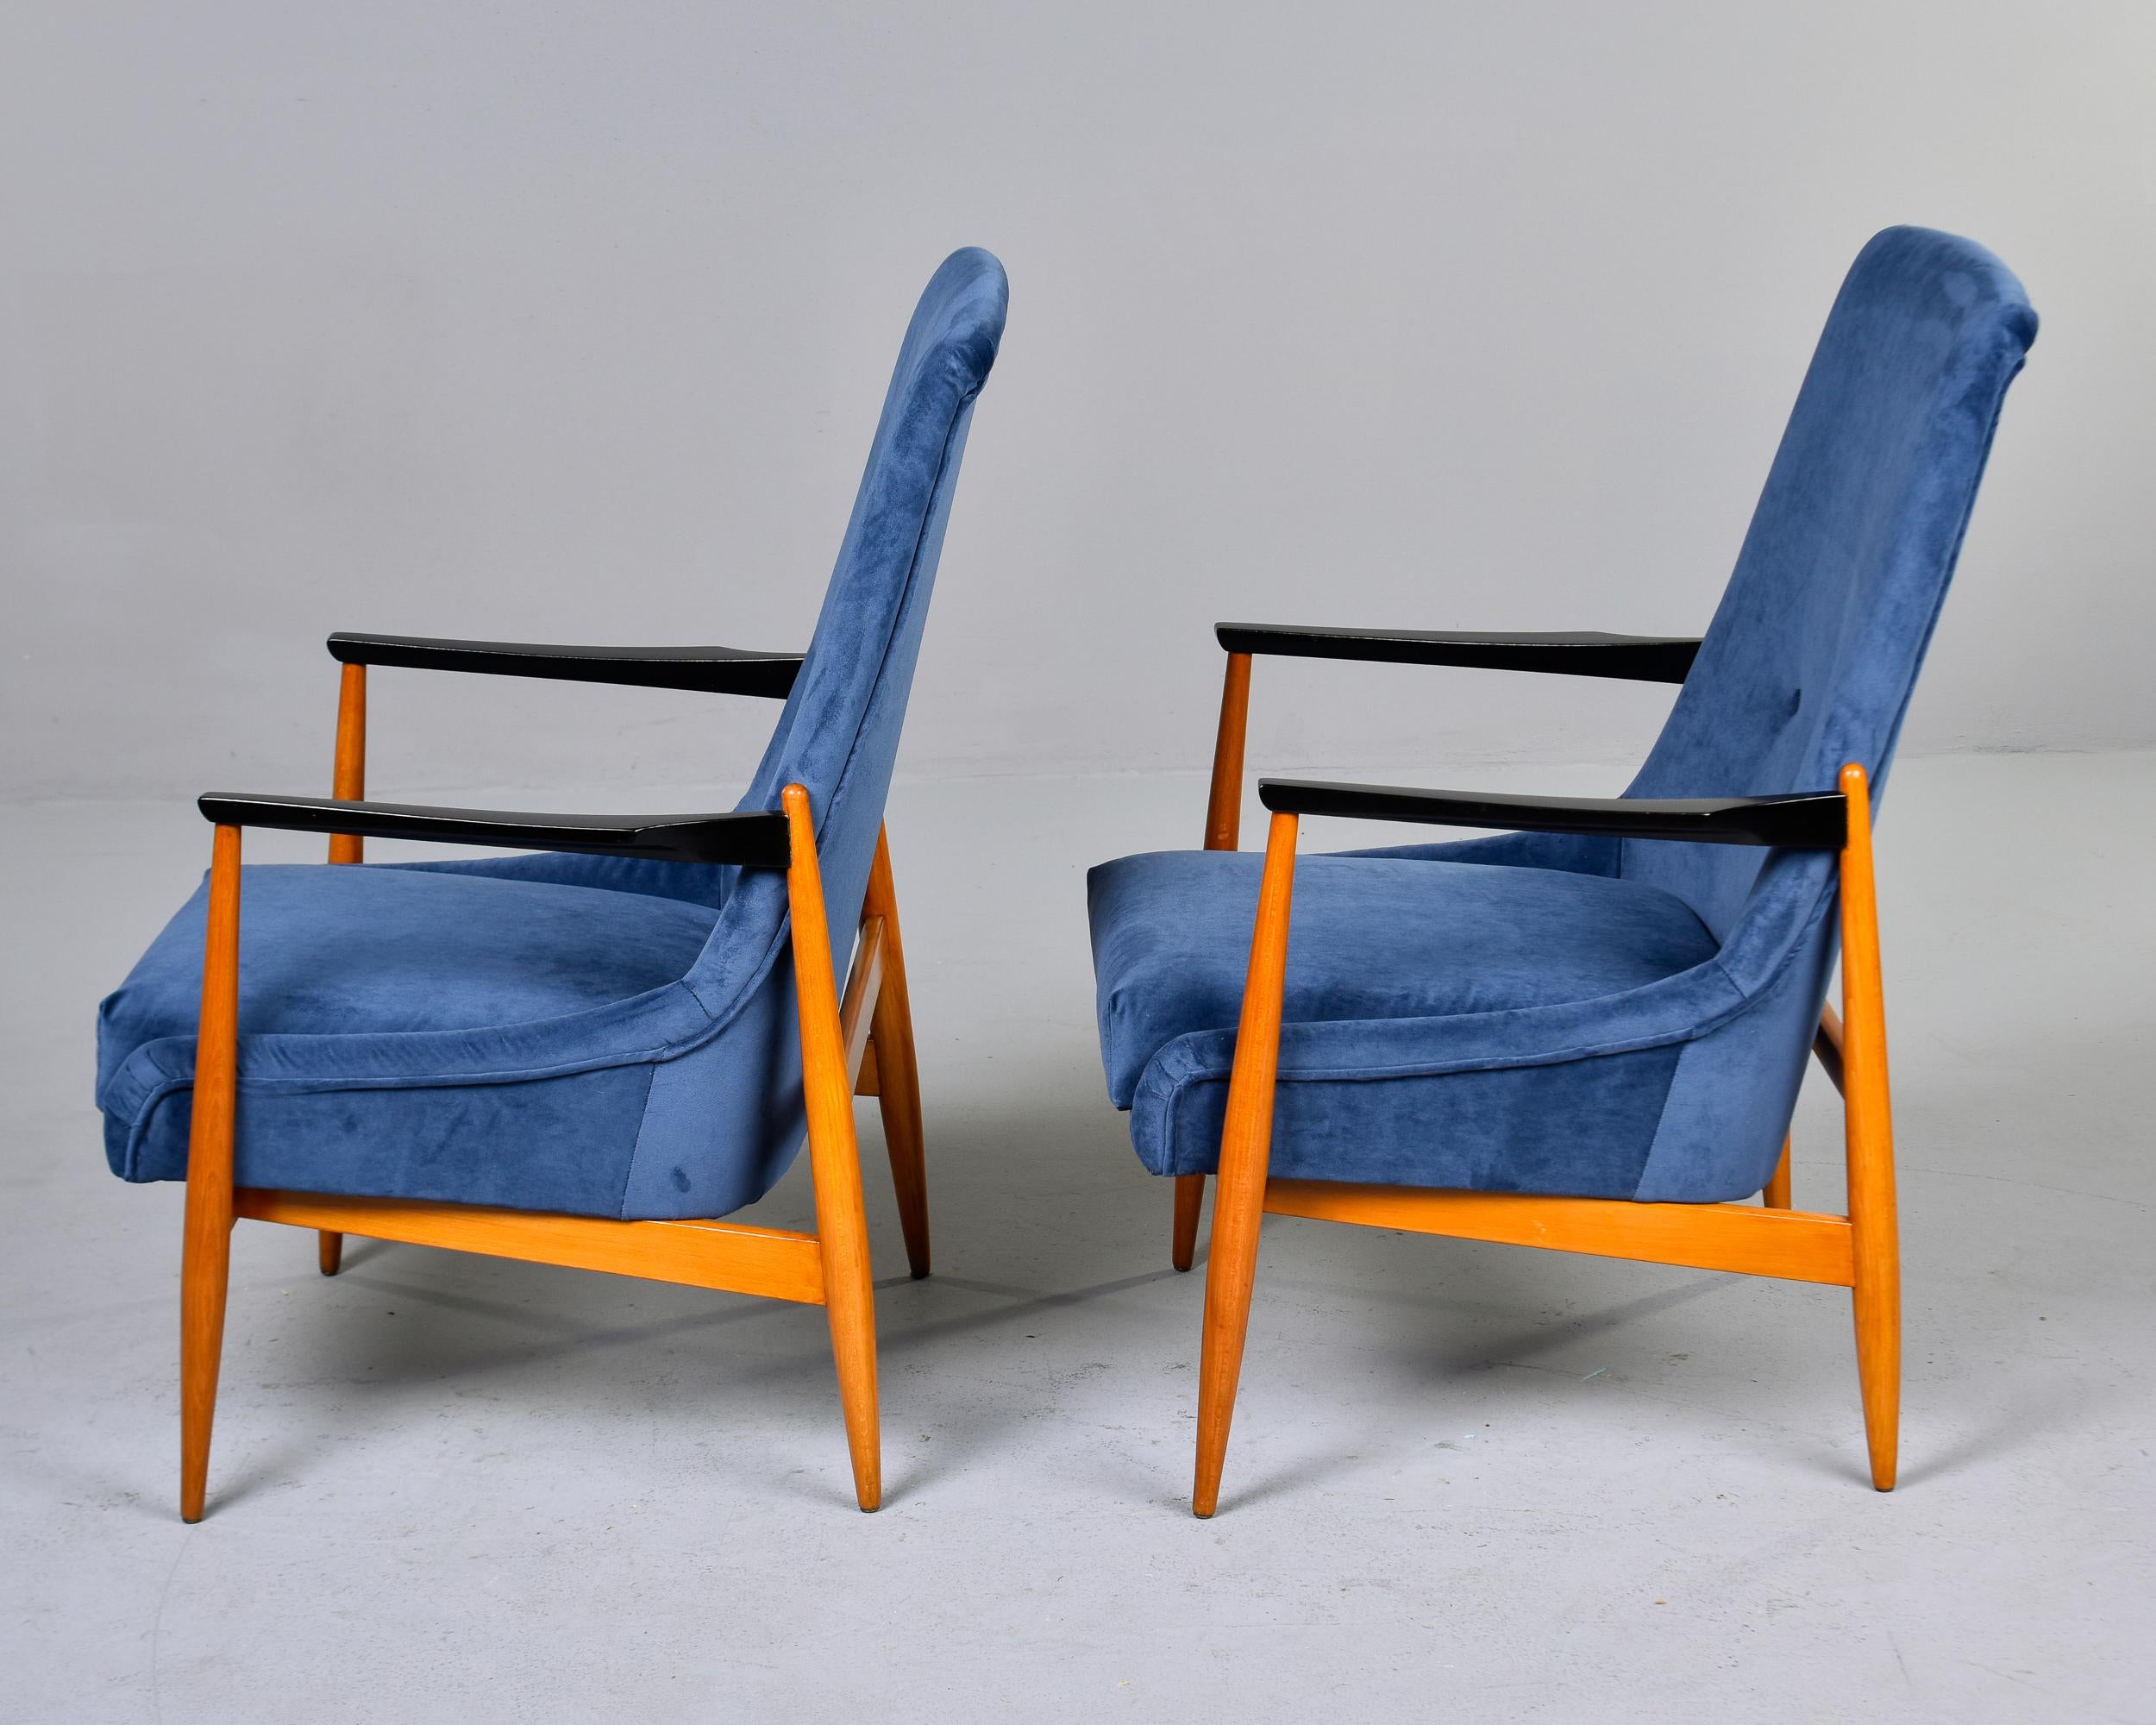 Pair Italian Mid Century Teak Frame Lounge Chairs with New Upholstery In Good Condition For Sale In Troy, MI